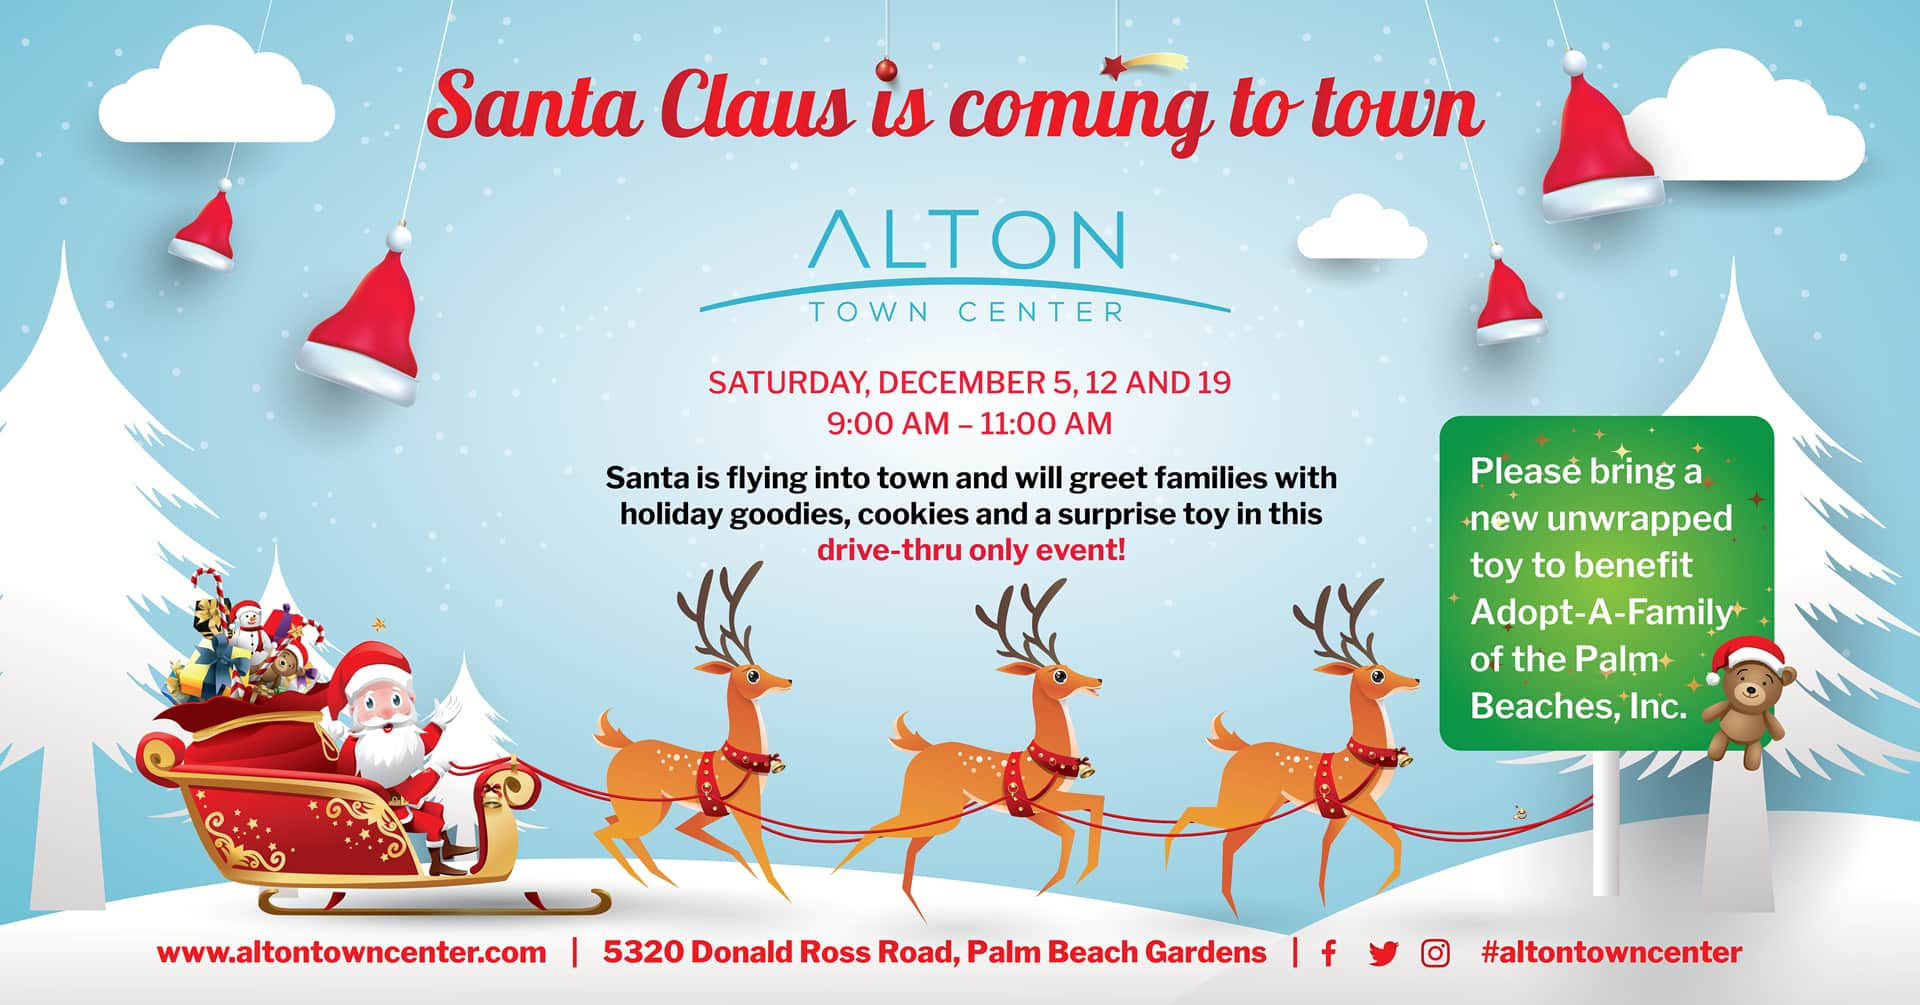 WristScan - WS event for this weekend is: “Santa's coming to town